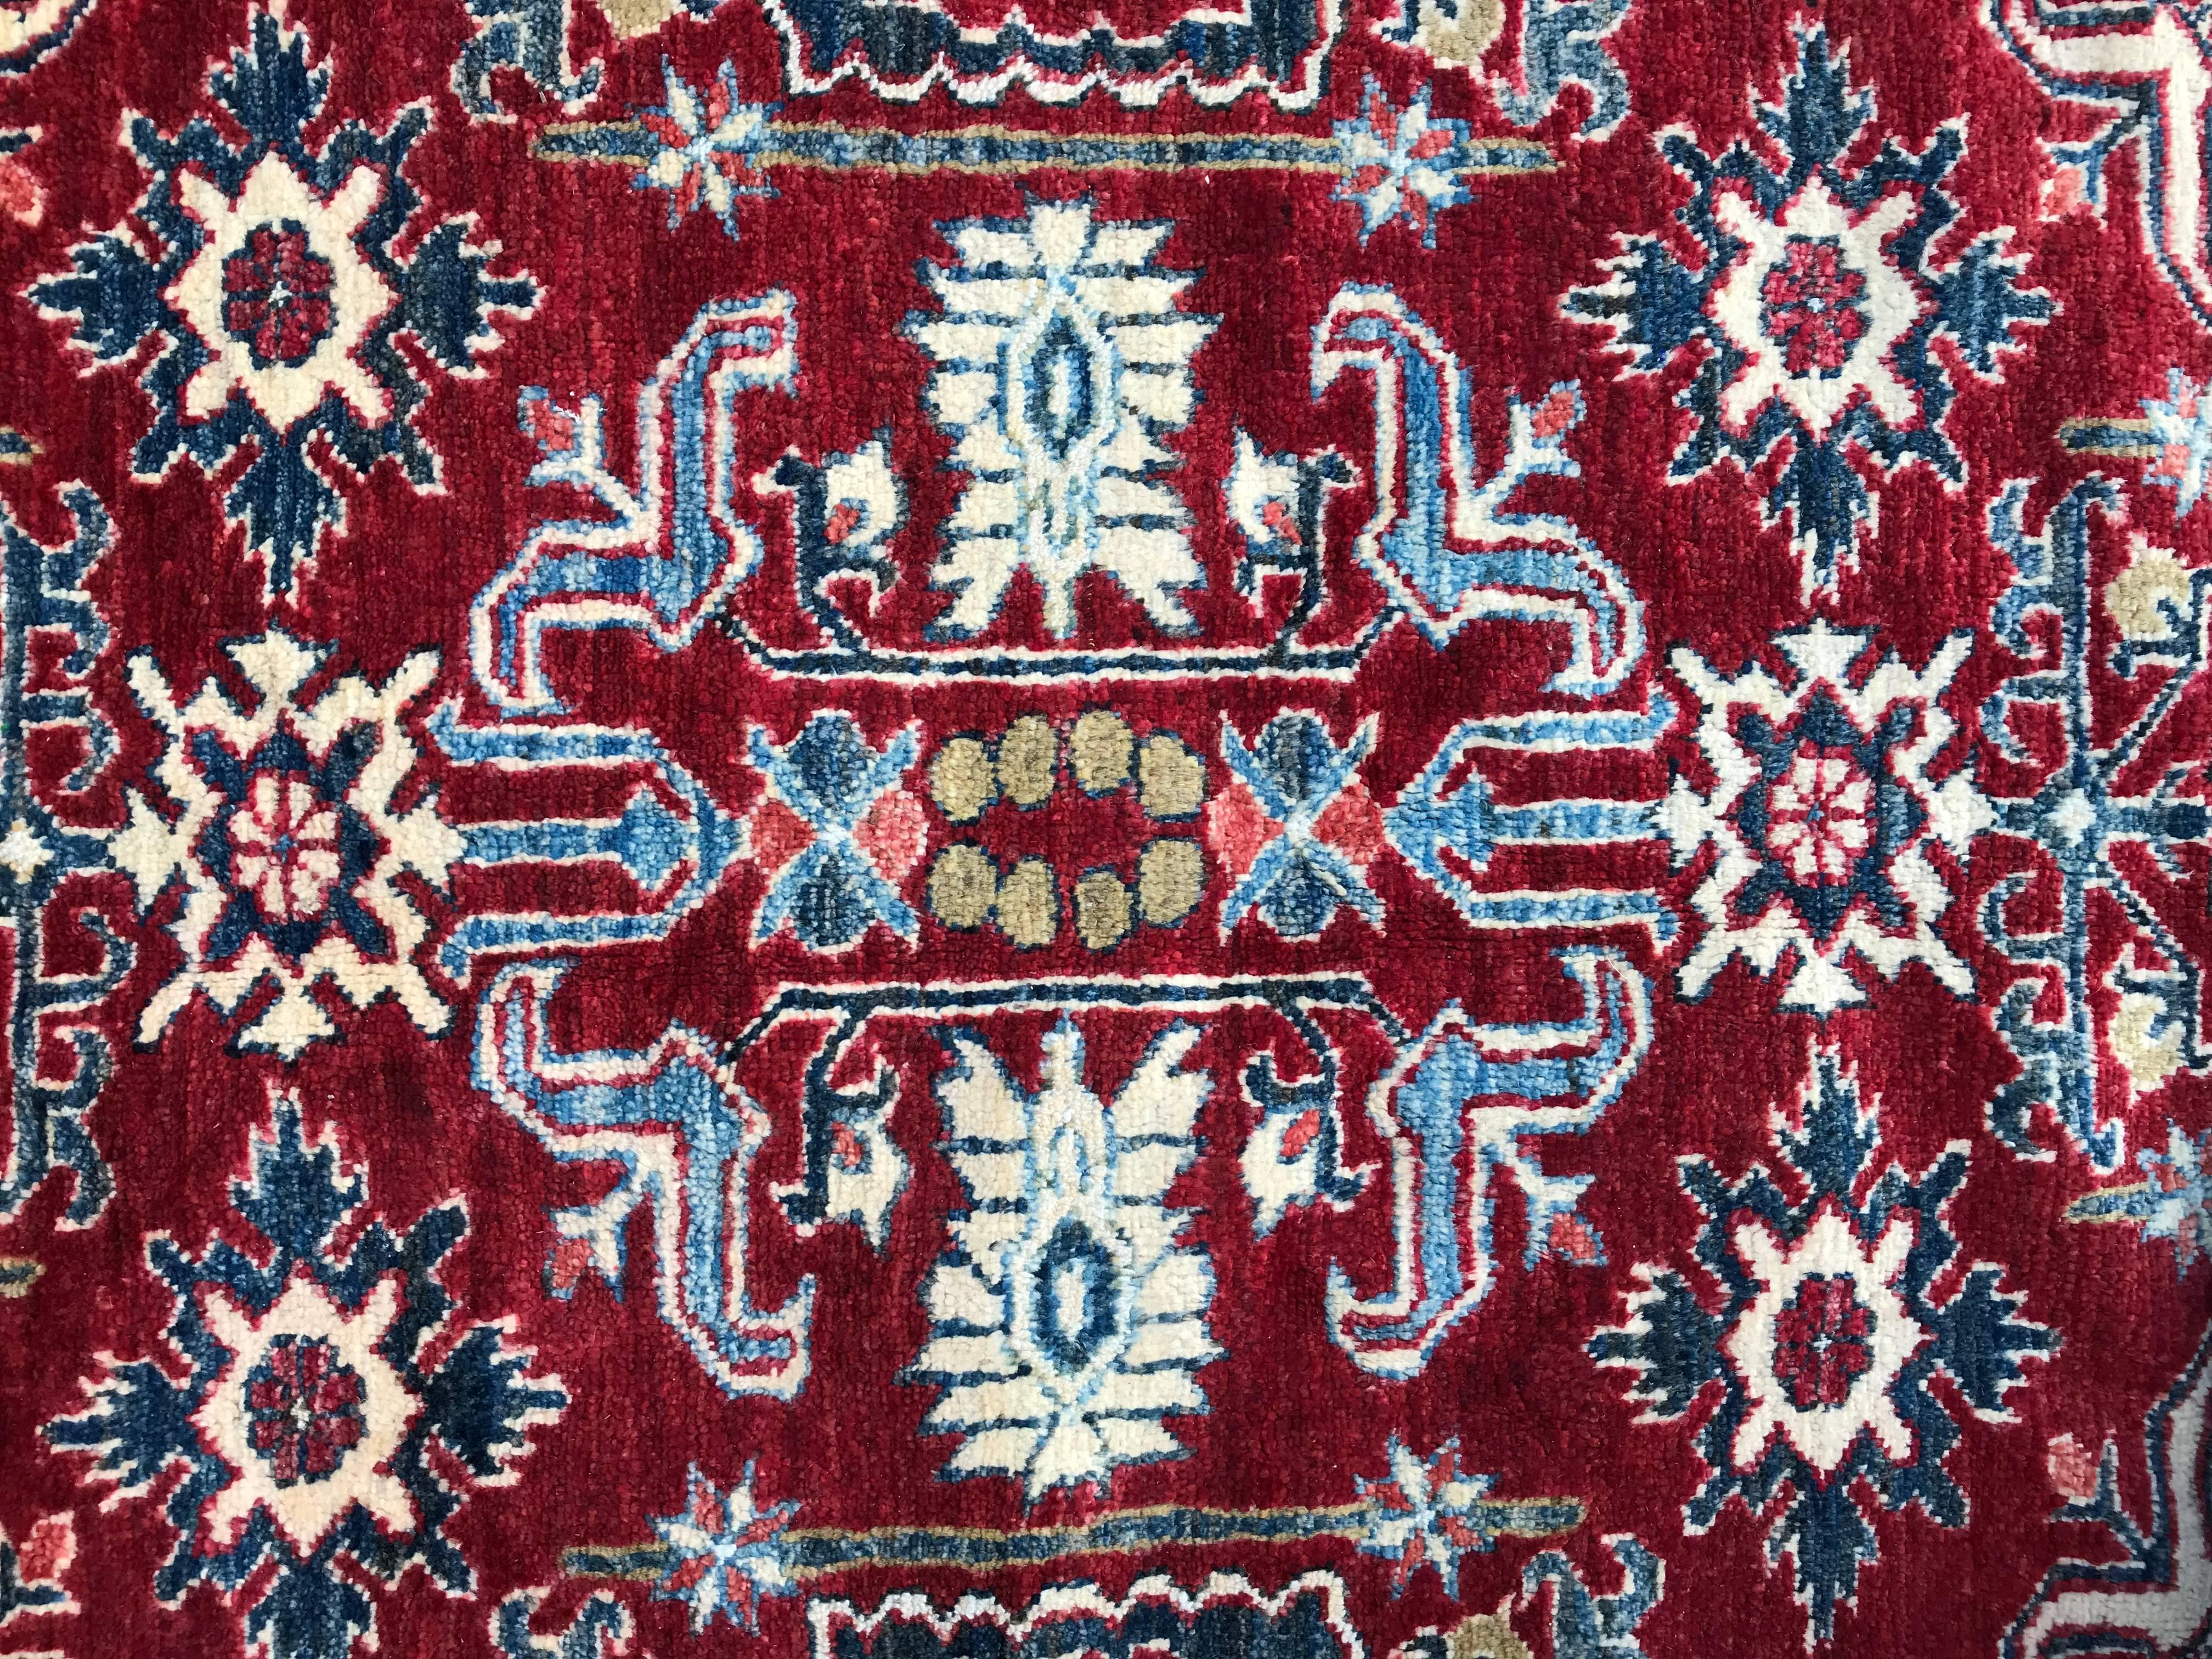 Decorative Afghan rug, Persian Mahal design, late 20th century with a beautiful decorative design and nice colors, entirely hand knotted with wool velvet on cotton foundation.

✨✨✨
